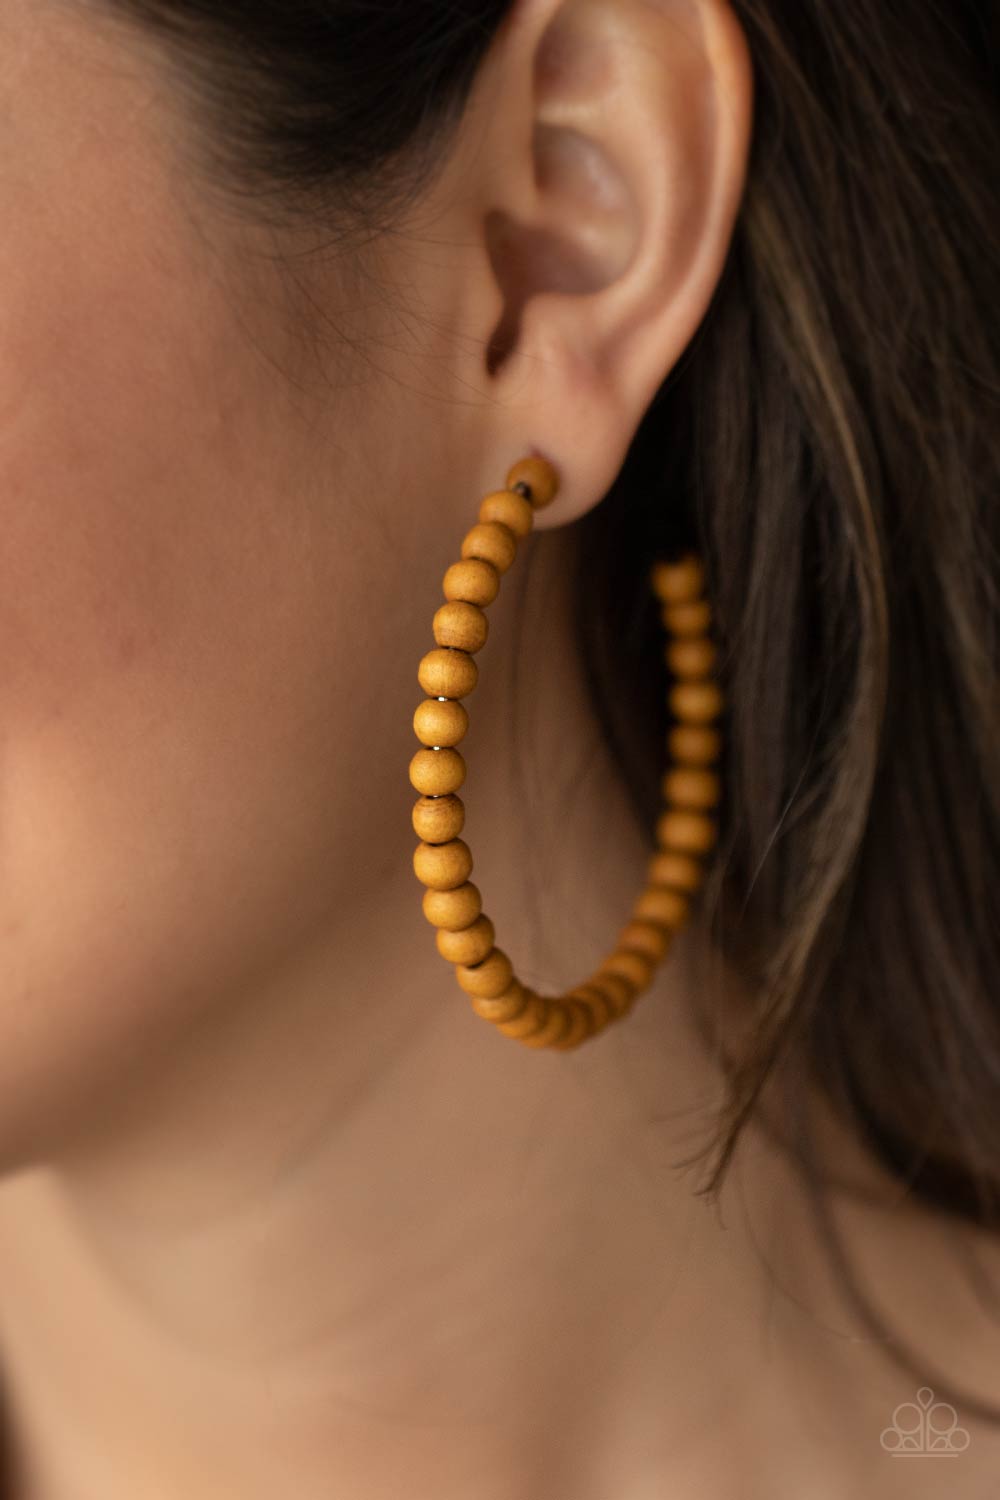 Should Have, Could Have, WOOD Have Brown-Earrings